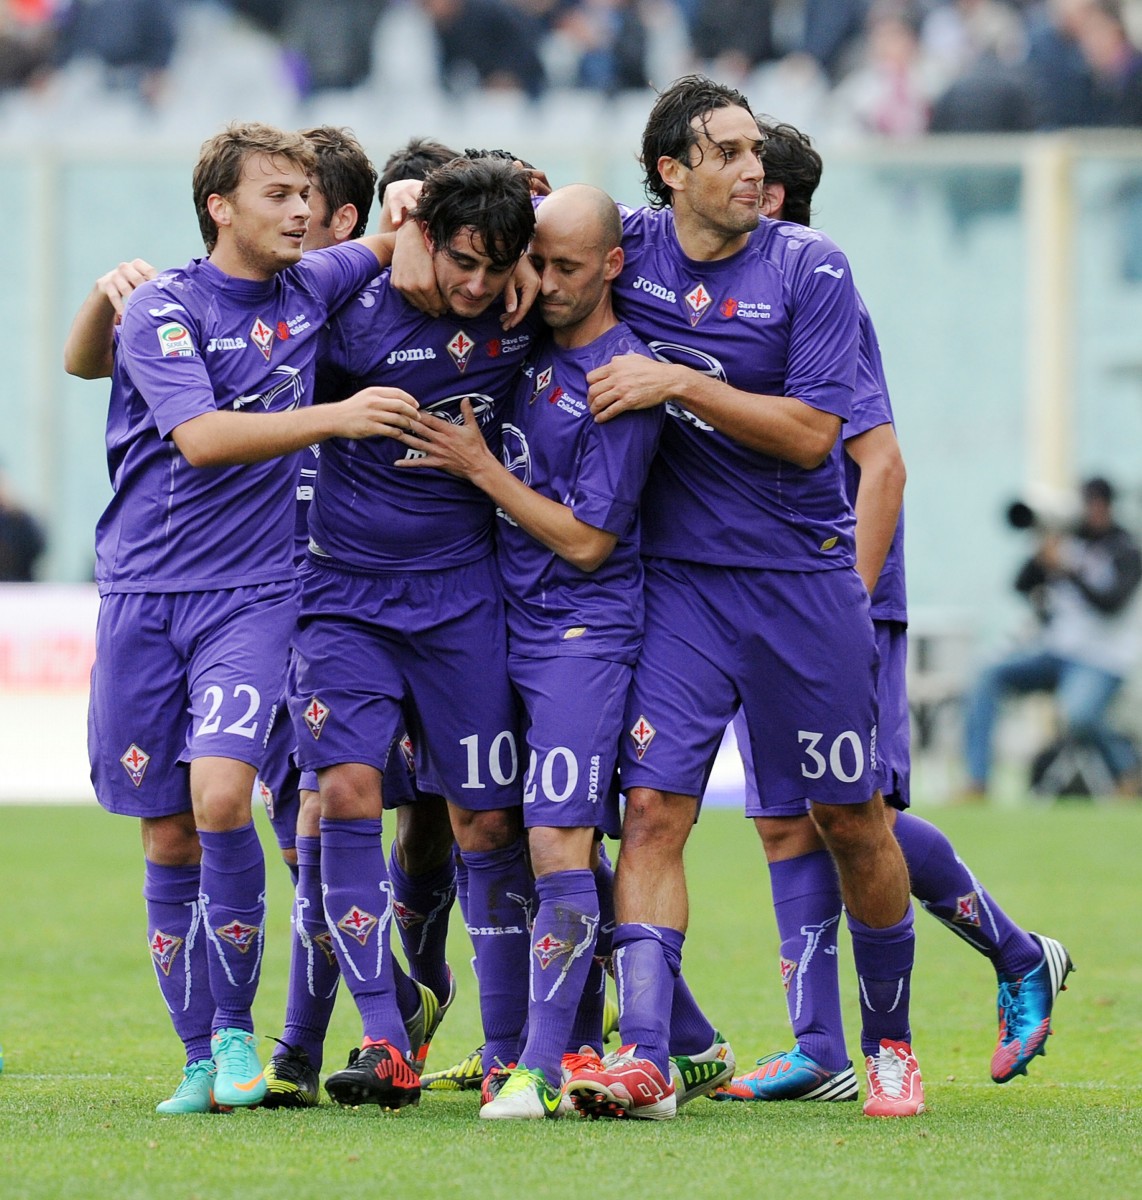 Alberto Aquilani (No. 10) is congratulated by teammates against Atalanta on Sunday at Artemio Franchi Stadium in Florence, Italy. He was the hero with two goals and an assist. (Giuseppe Bellini/Getty Images) 